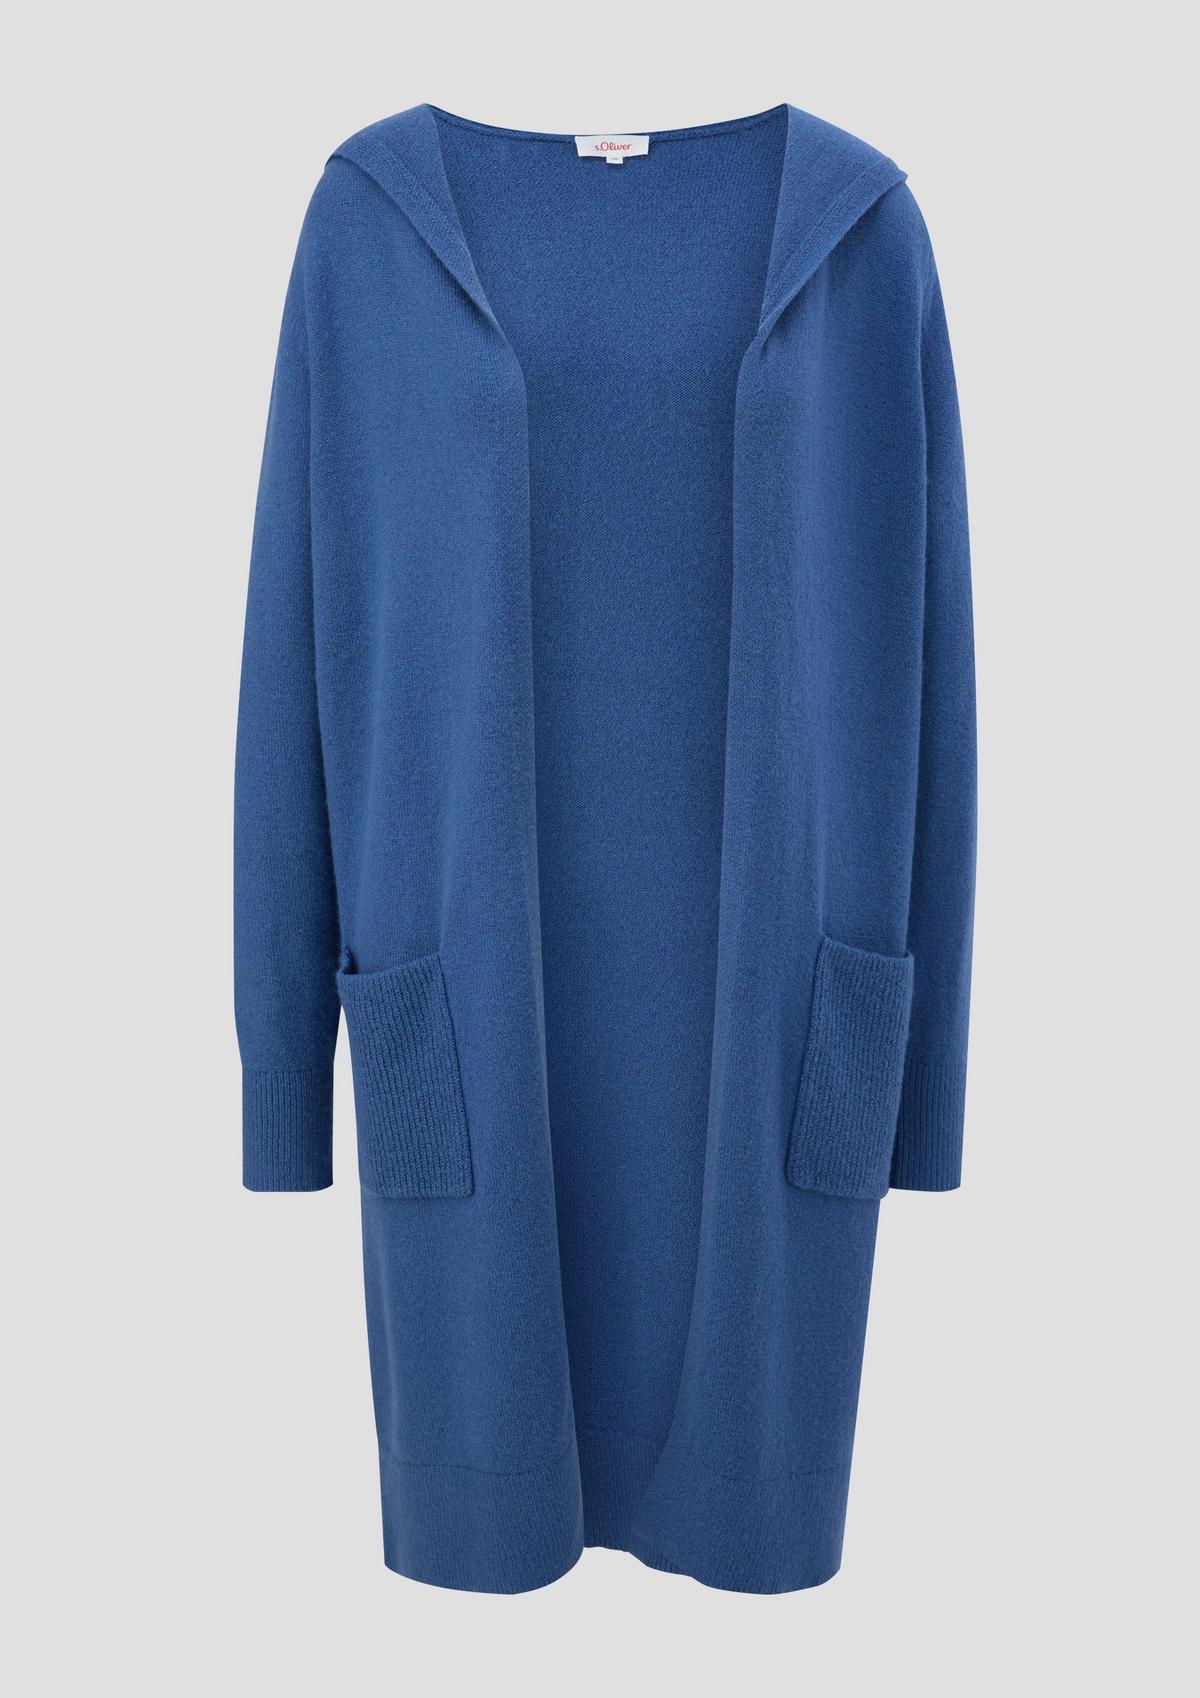 hood with Open - long blue cardigan a